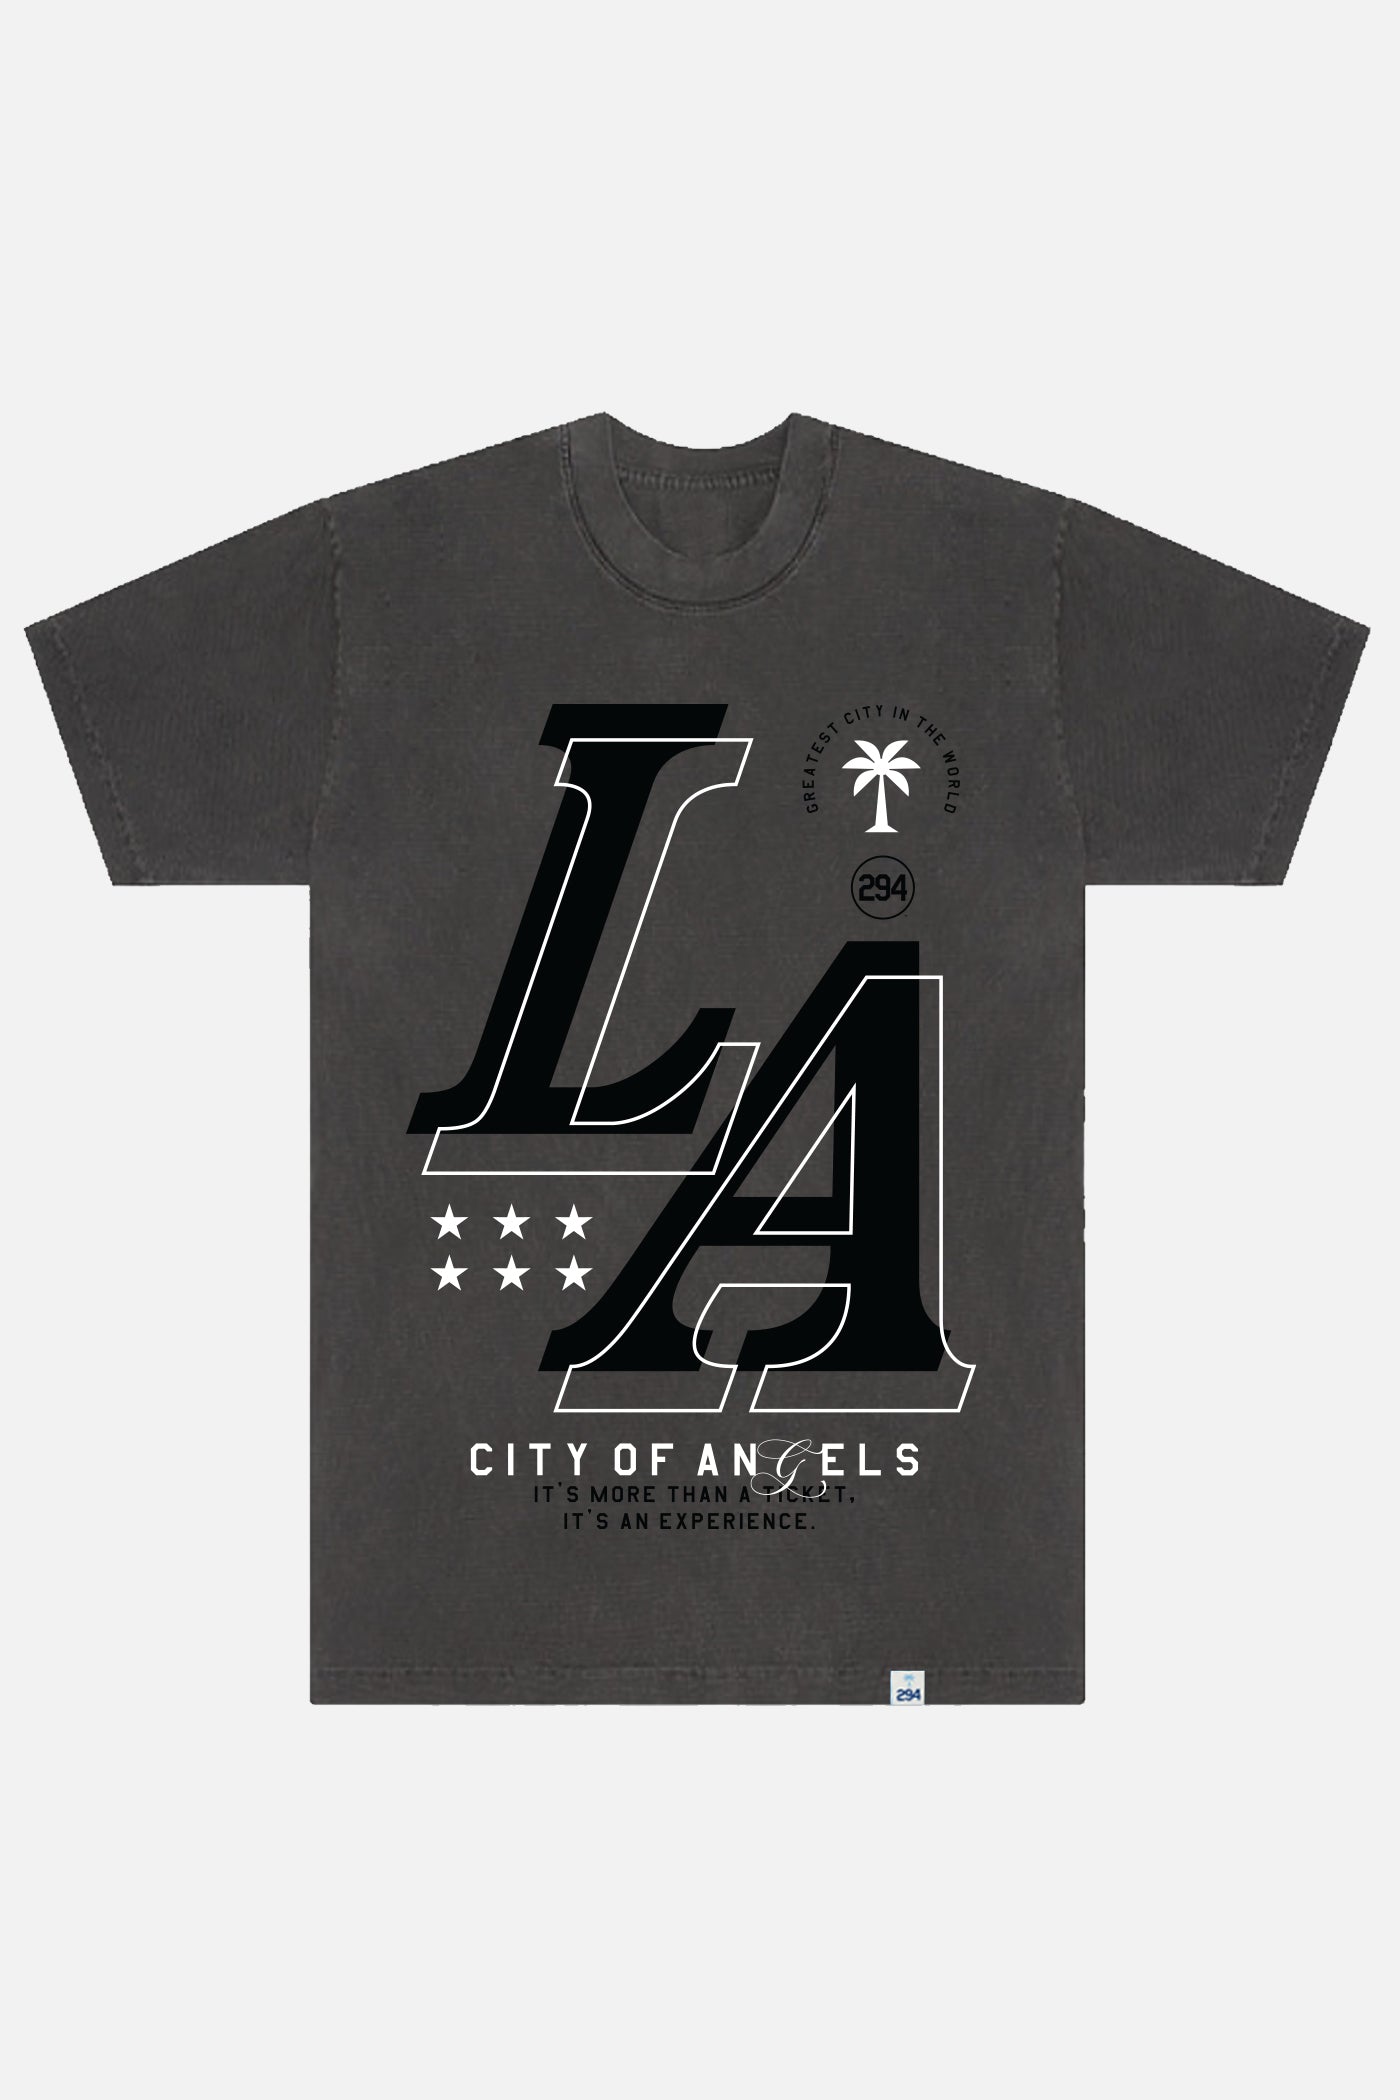 Retro Vintage Collection (City of Angels) - Vintage Tee